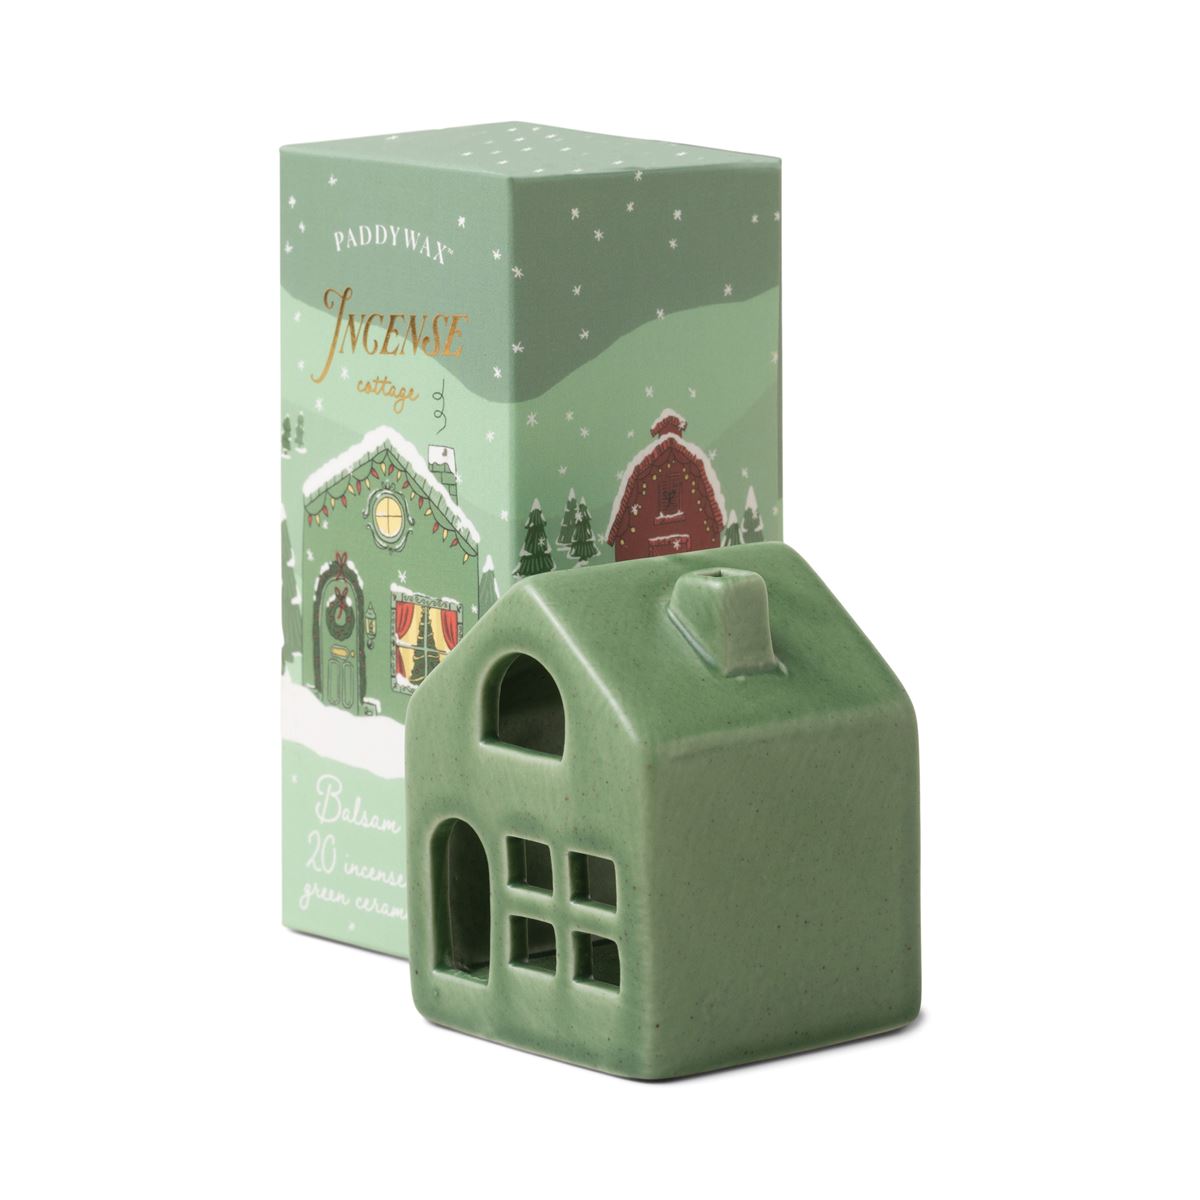 Ceramic Incense Cottage - Balsam & Fir Paddywax Winter Scents Paddywax   